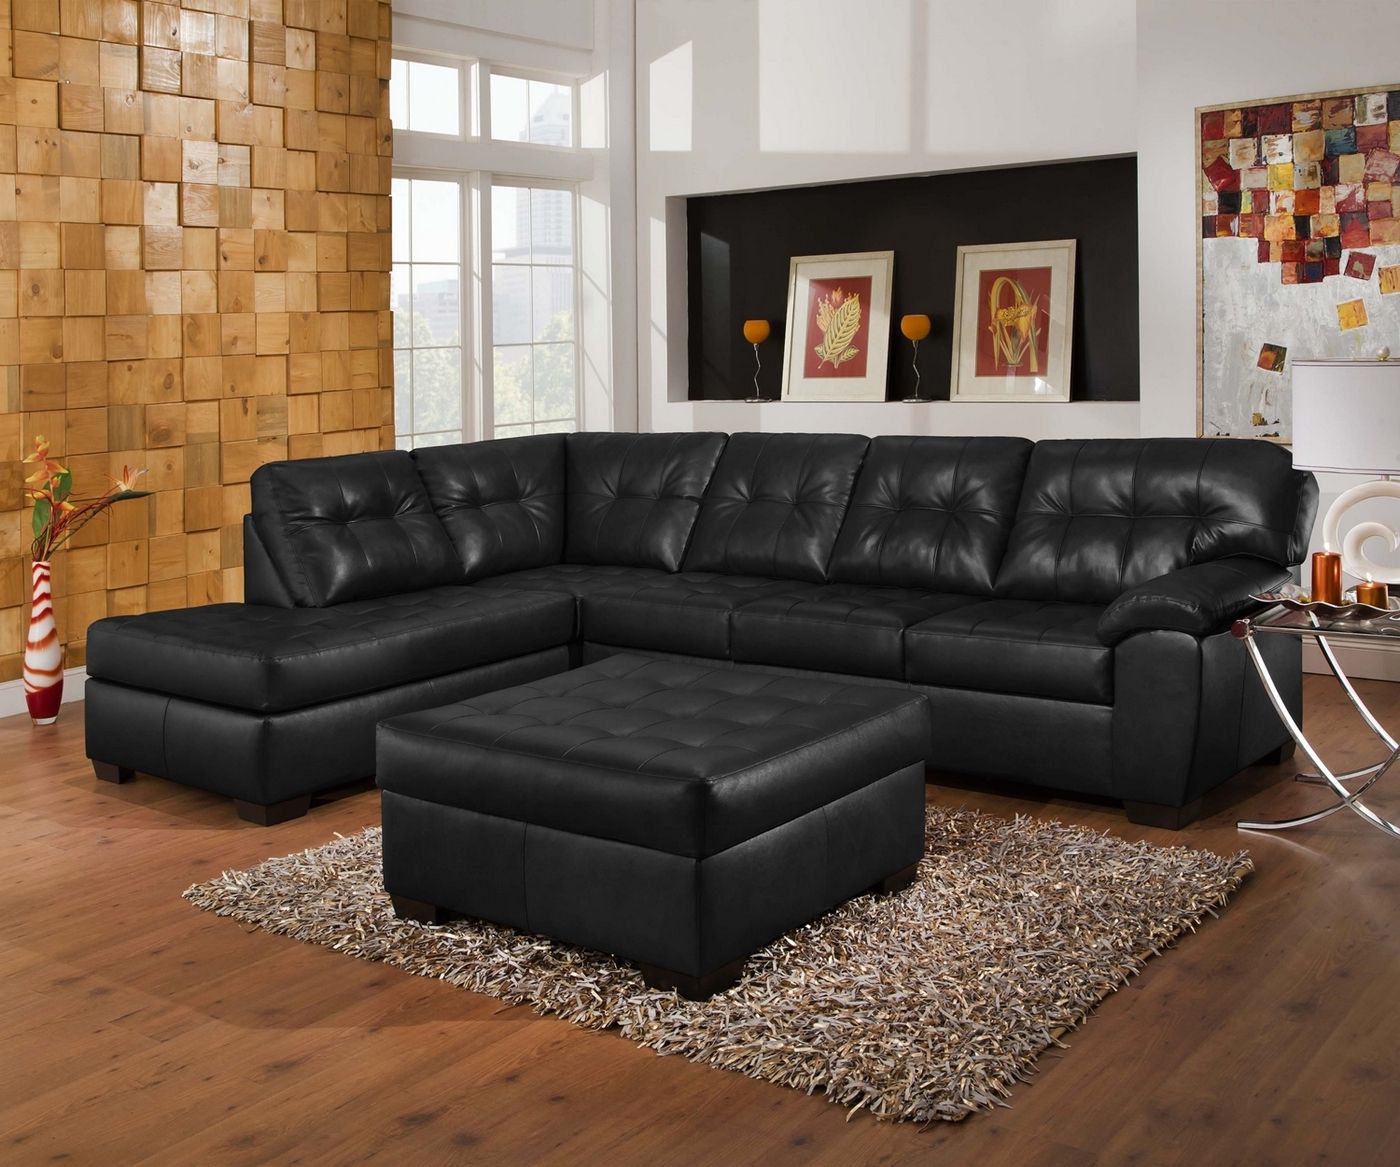 Soho Contemporary Onyx Leather Sectional Sofa W/ Left Chaise Pertaining To 2pc Connel Modern Chaise Sectional Sofas Black (View 10 of 15)